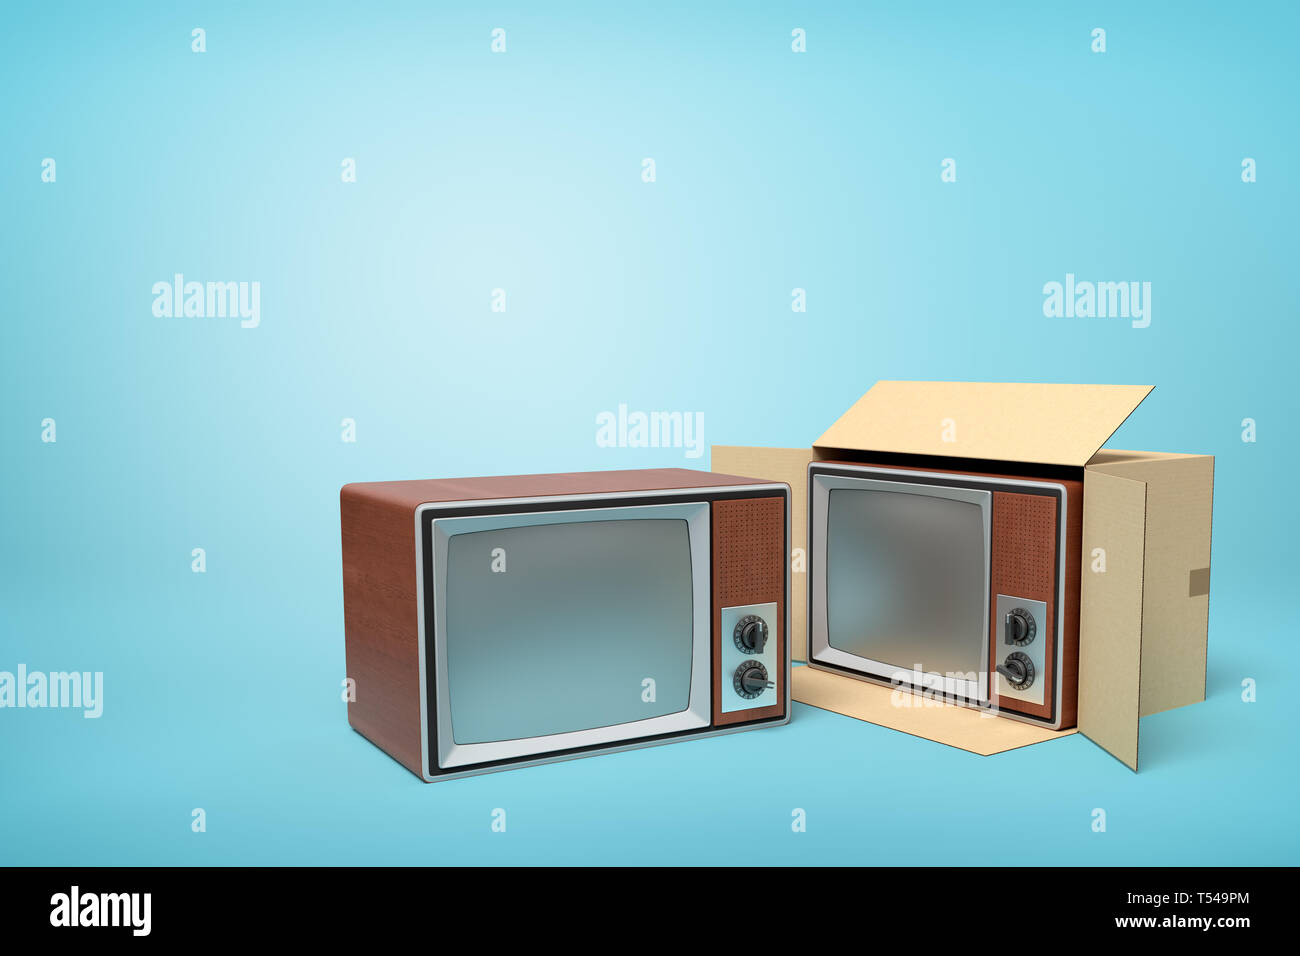 3d rendering of retro TV set in carton box on blue background. Stock Photo